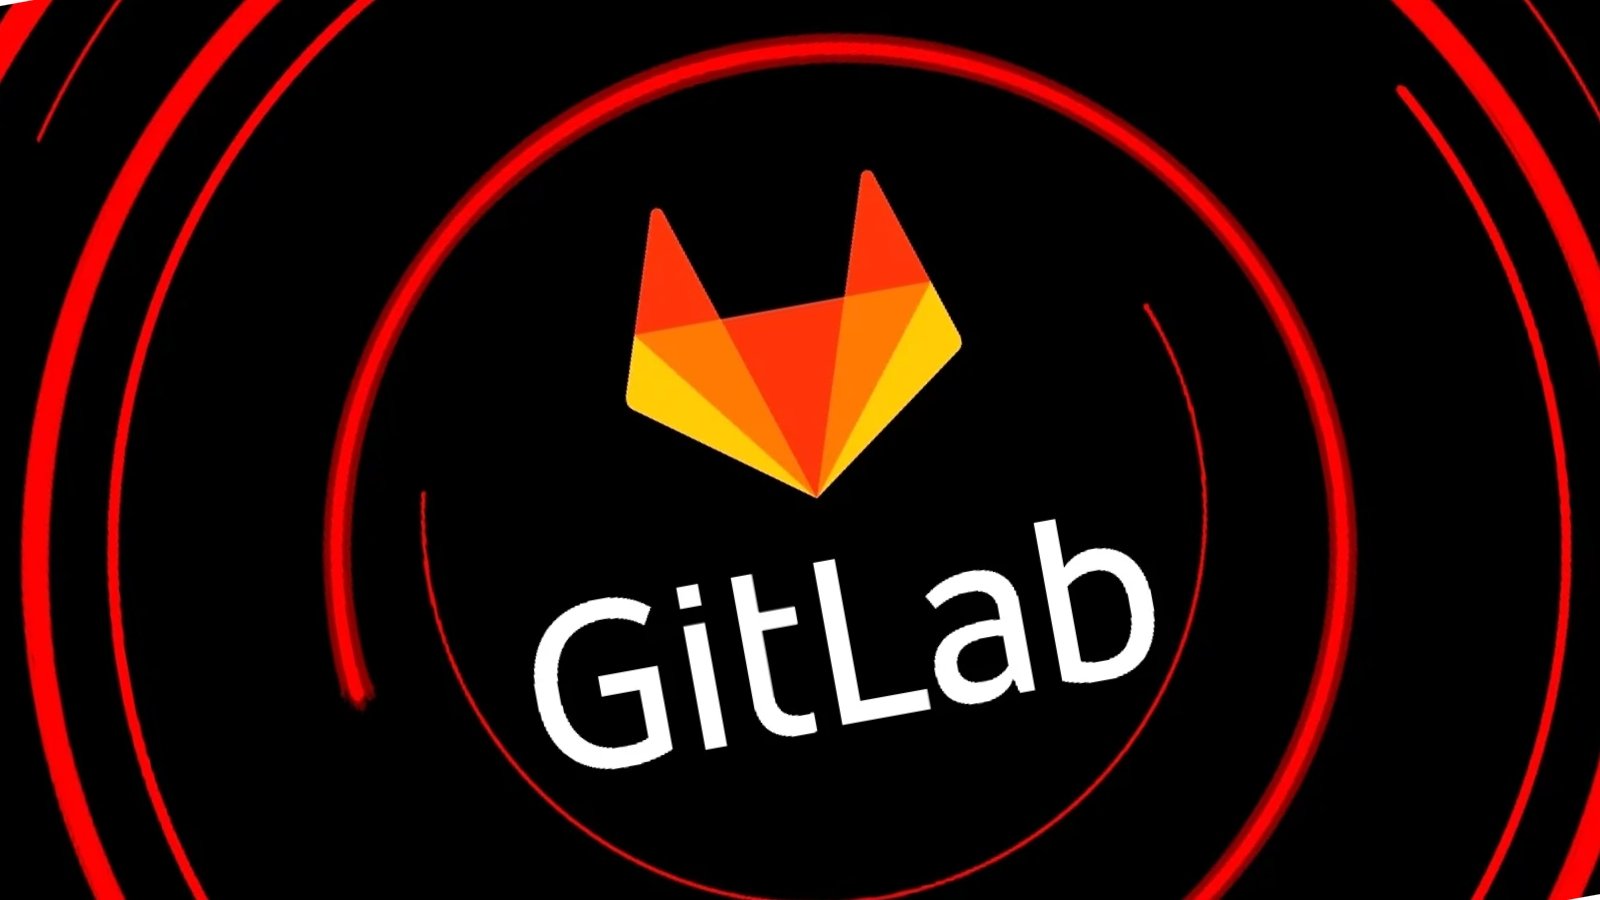 CISA says GitLab account takeover bug is actively exploited in attacks